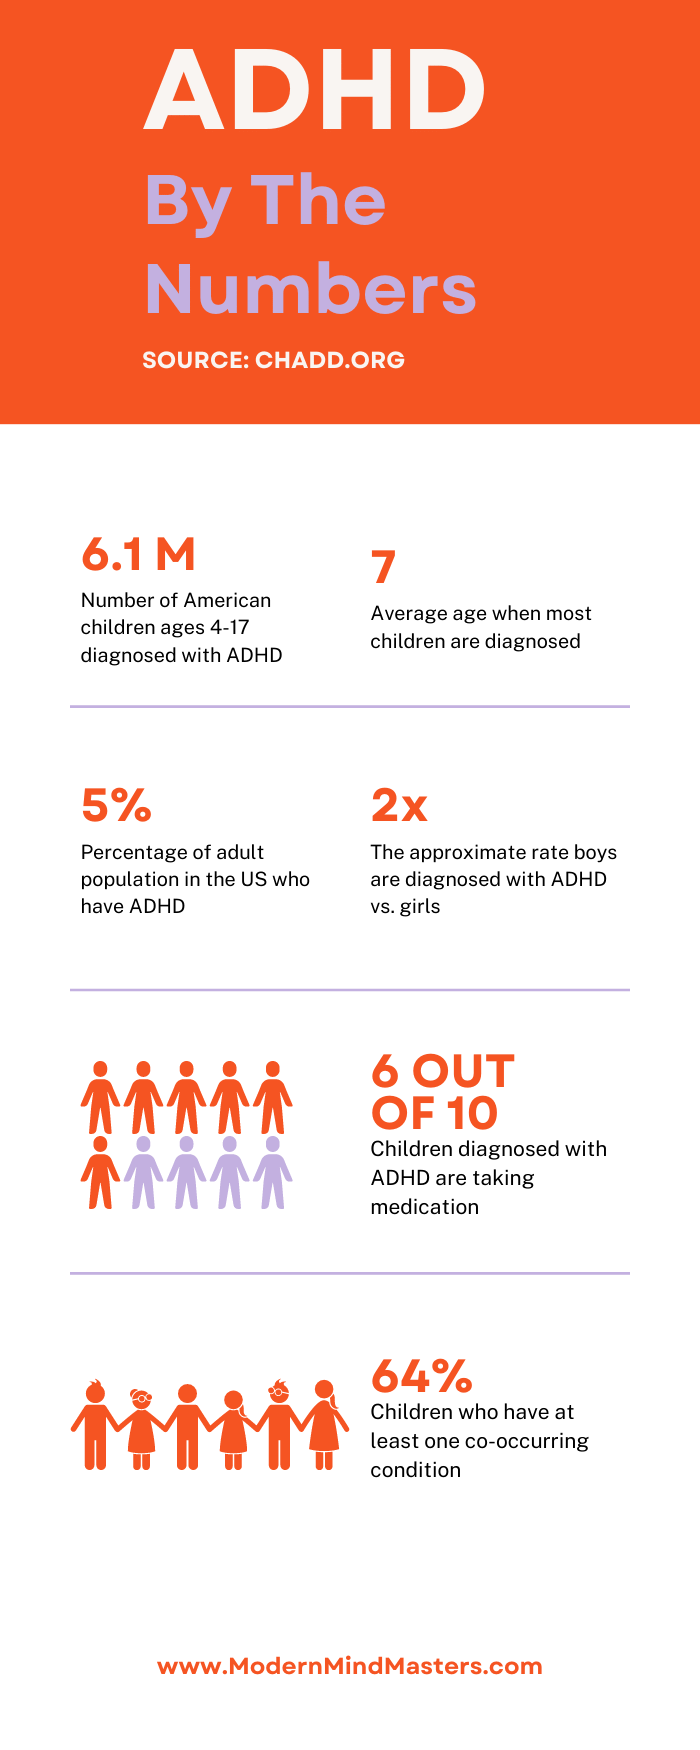 Statistics about ADHD in children and adults.